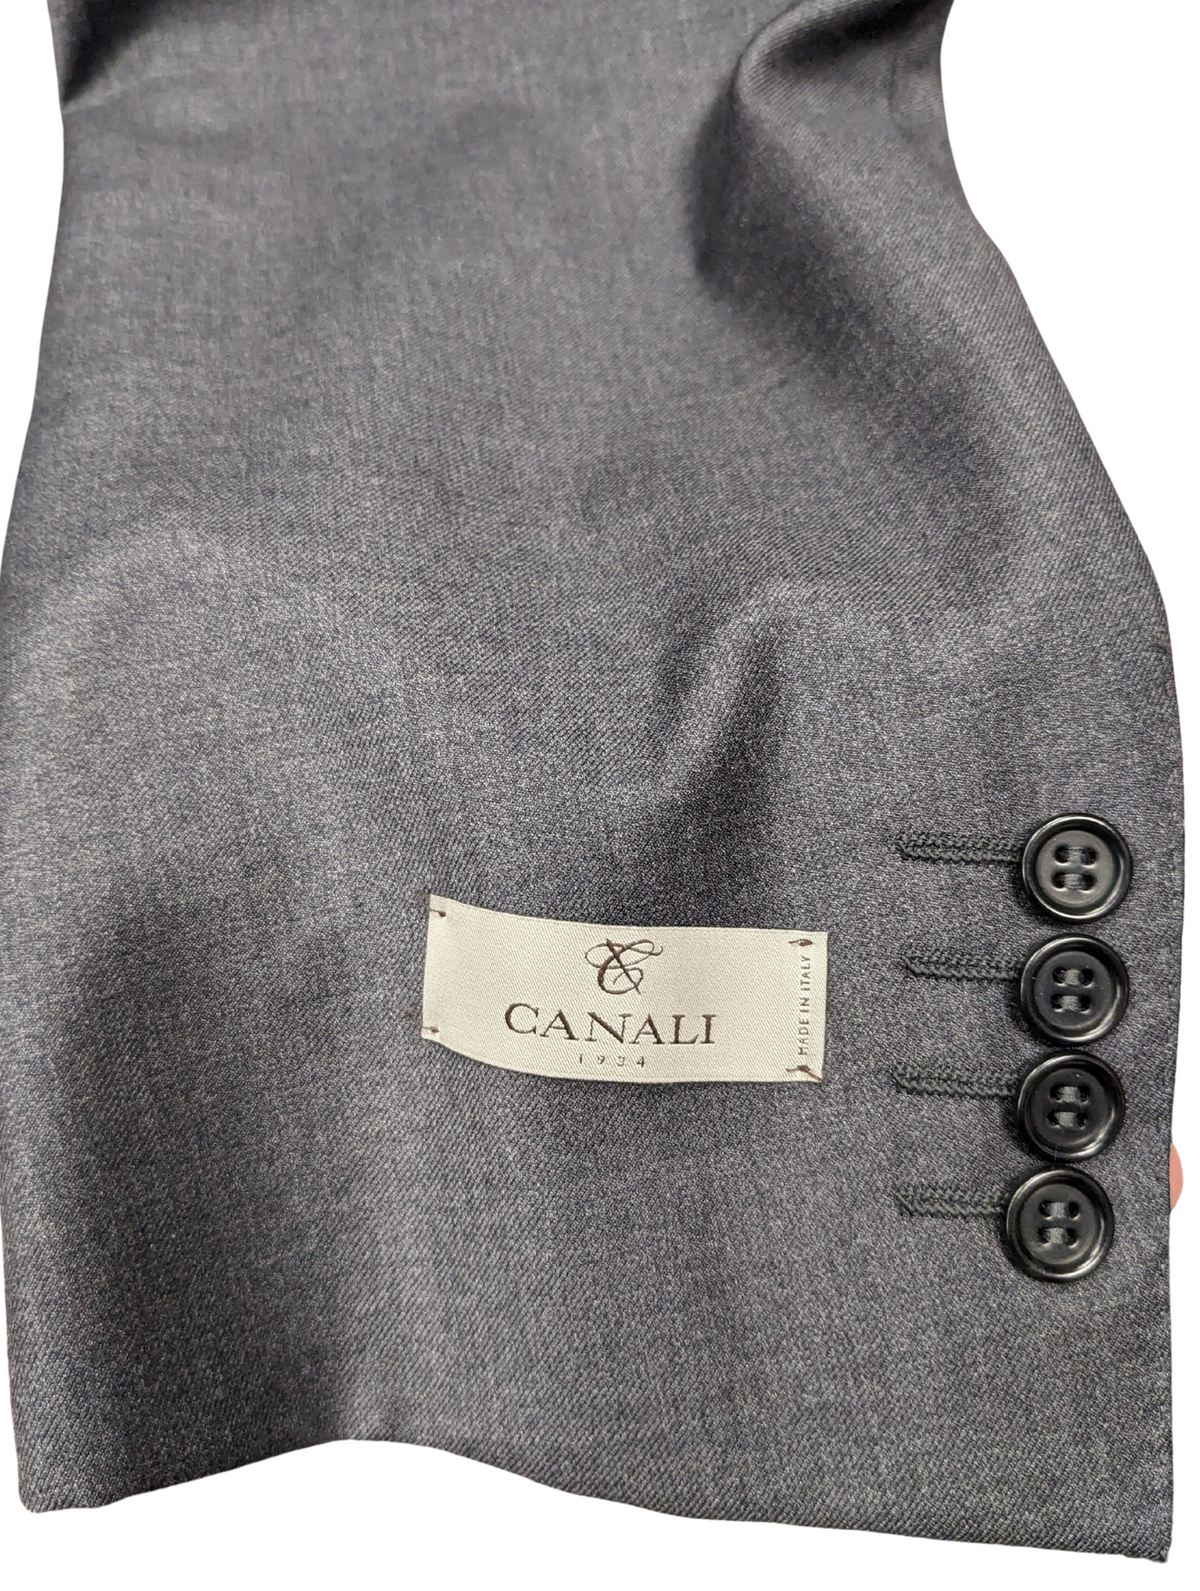 Canali 1934 Mens Solid Charcoal Gray 44L Drop 7 100% Wool 2 Piece Suit